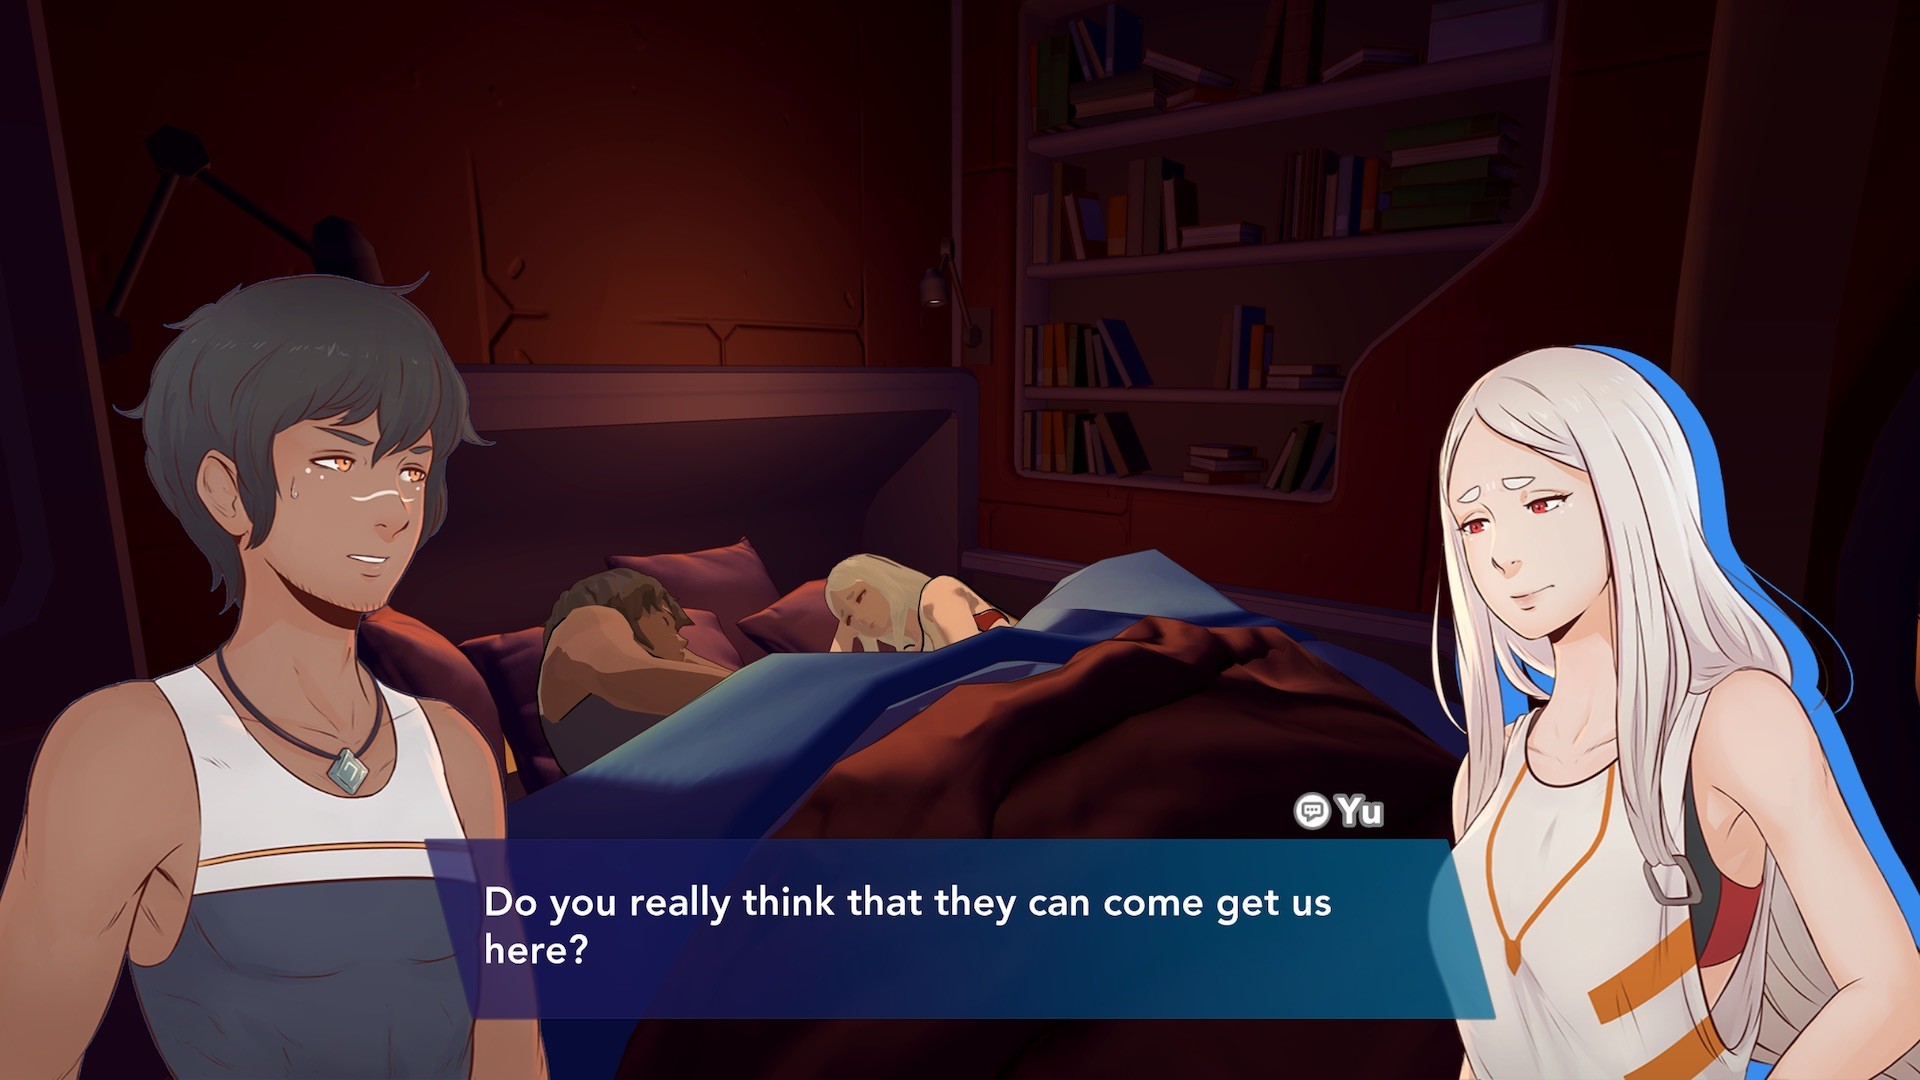 One Room: Runaway Girl v.1.1 English [18+] -  - Android & iOS  MODs, Mobile Games & Apps